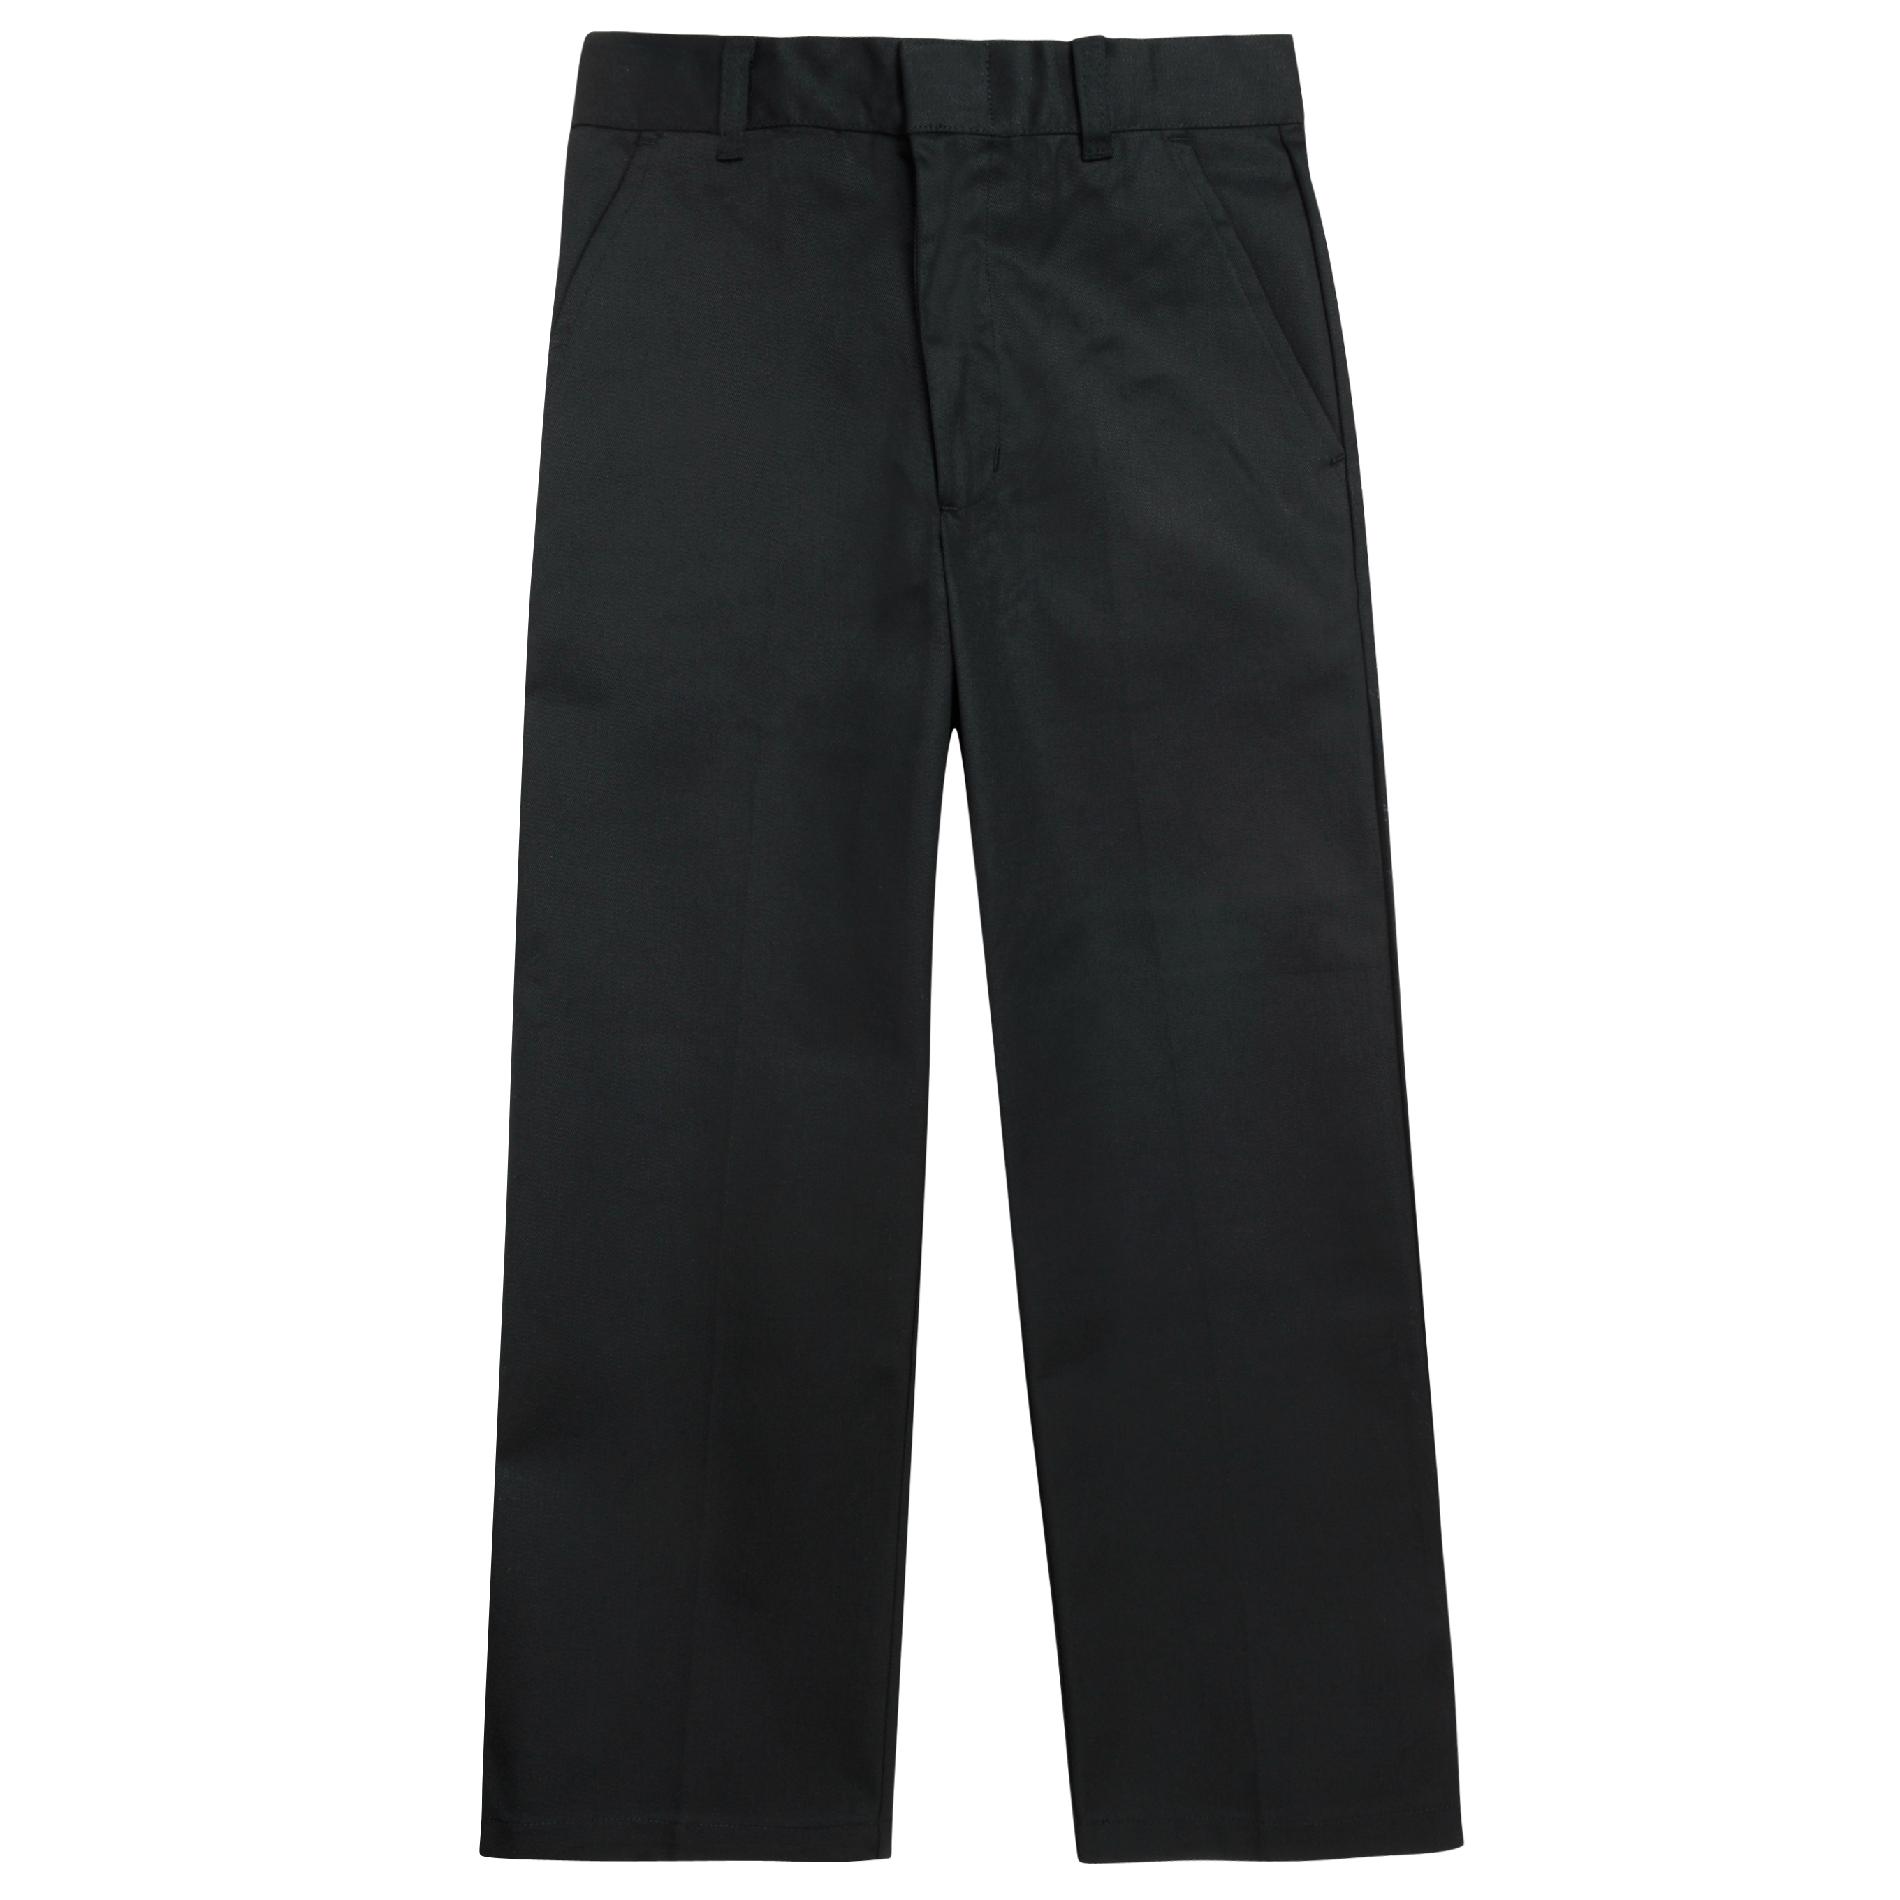 At School by French Toast Young Men's Twill Pant